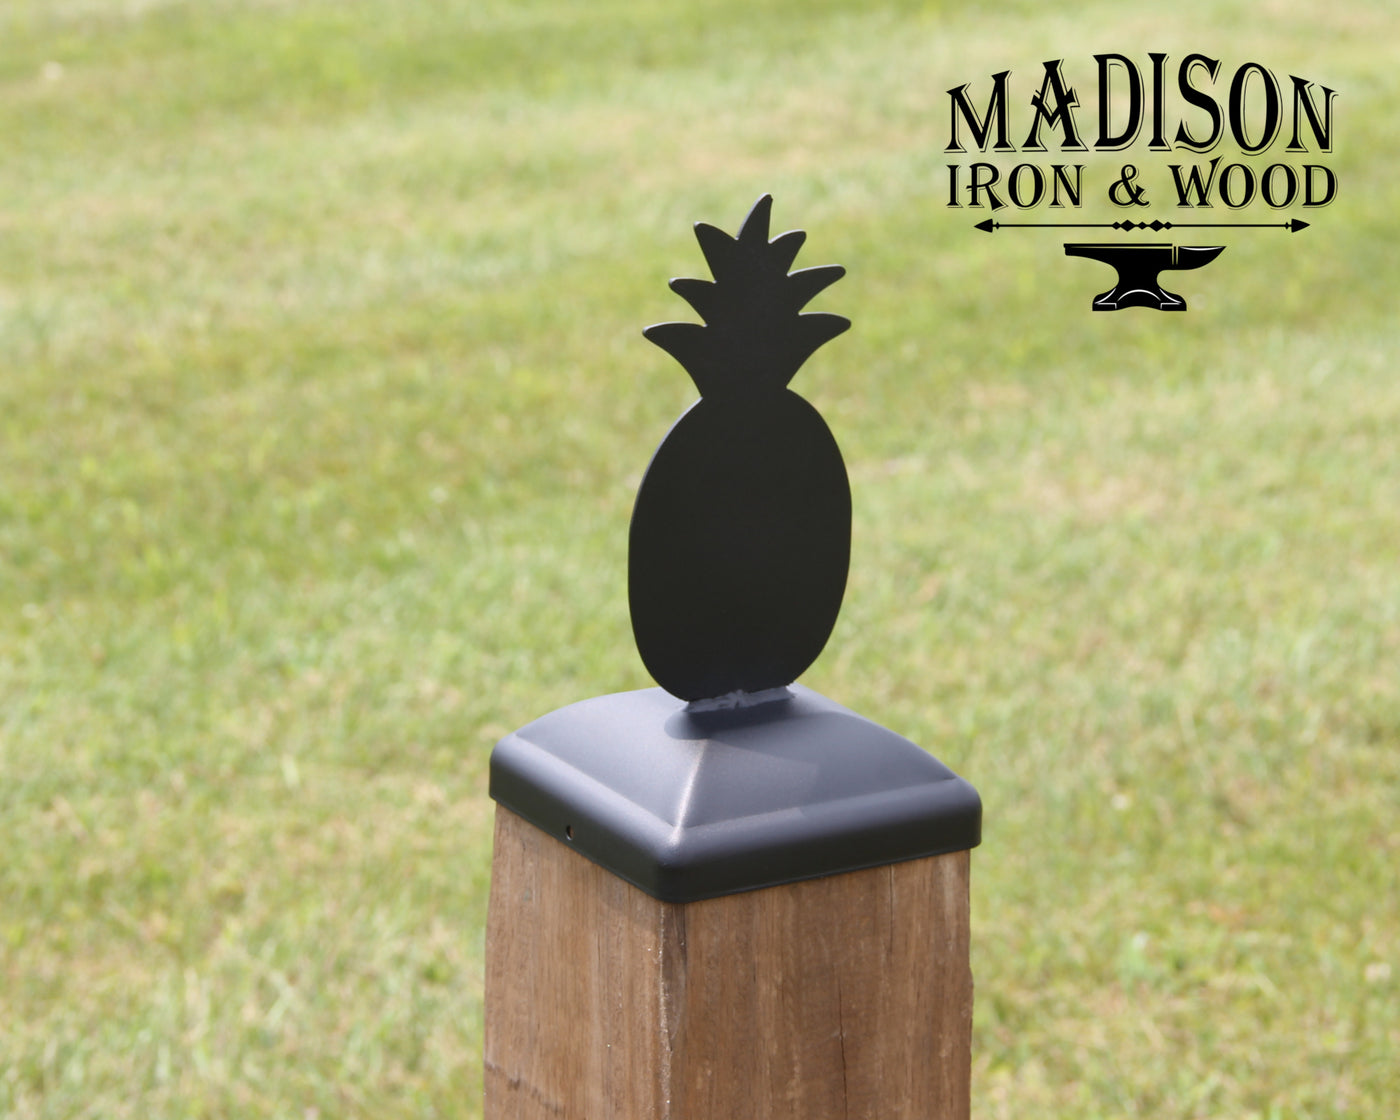 6x6 Pineapple Post Cap - Madison Iron and Wood - Post Cap - metal outdoor decor - Steel deocrations - american made products - veteran owned business products - fencing decorations - fencing supplies - custom wall decorations - personalized wall signs - steel - decorative post caps - steel post caps - metal post caps - brackets - structural brackets - home improvement - easter - easter decorations - easter gift - easter yard decor